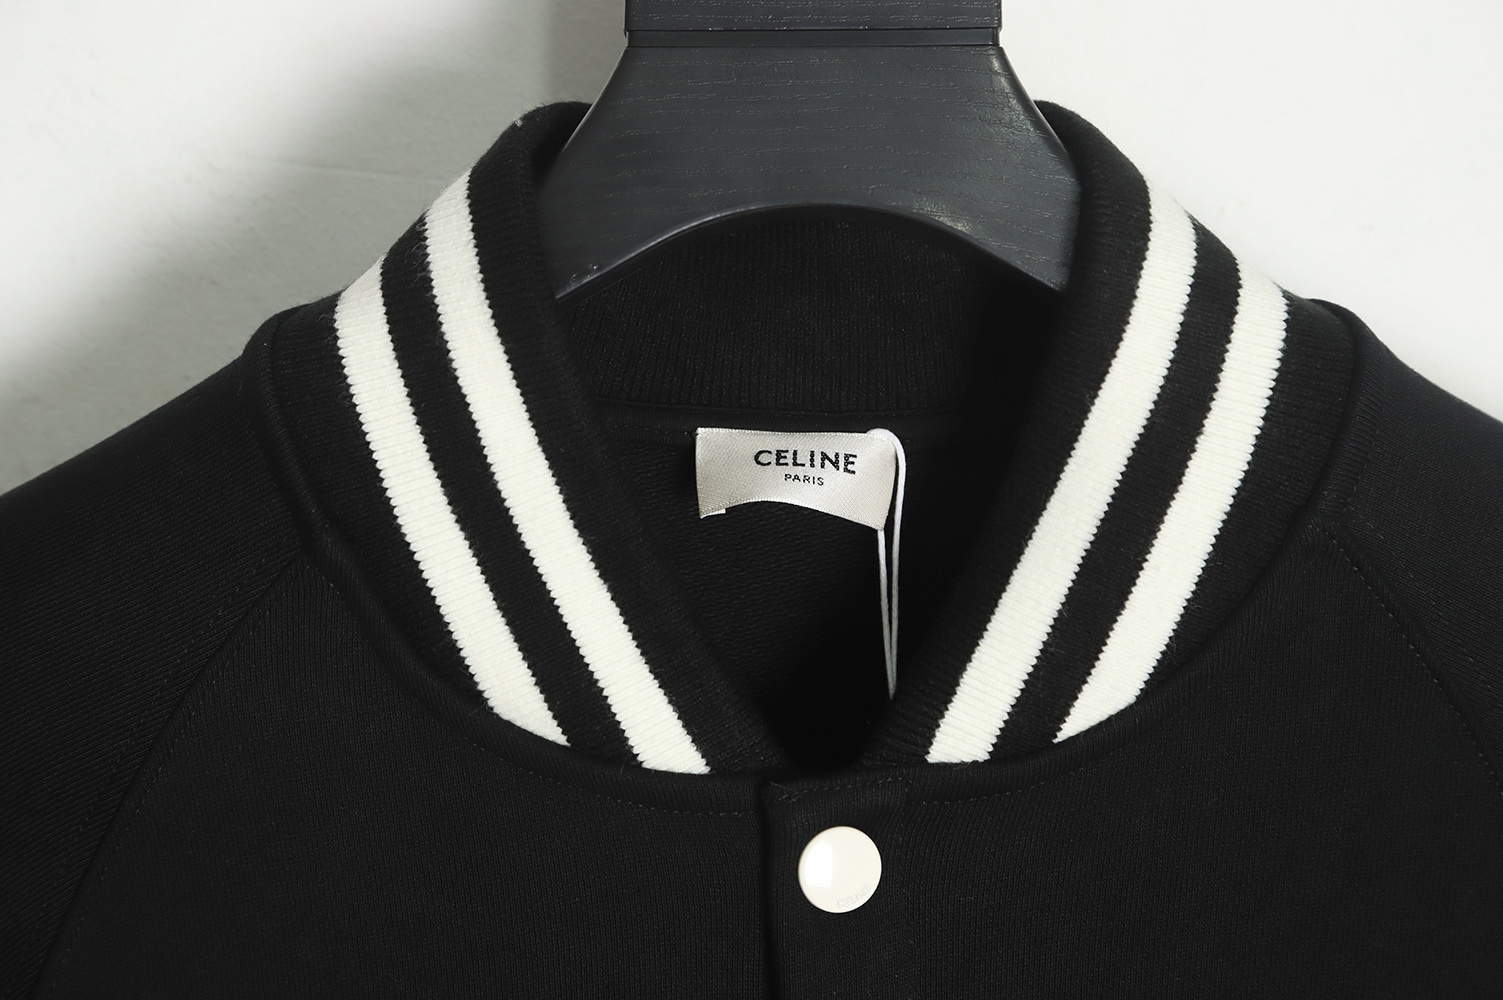 Celine 22FW Towel Embroidered Letters Baseball Jersey